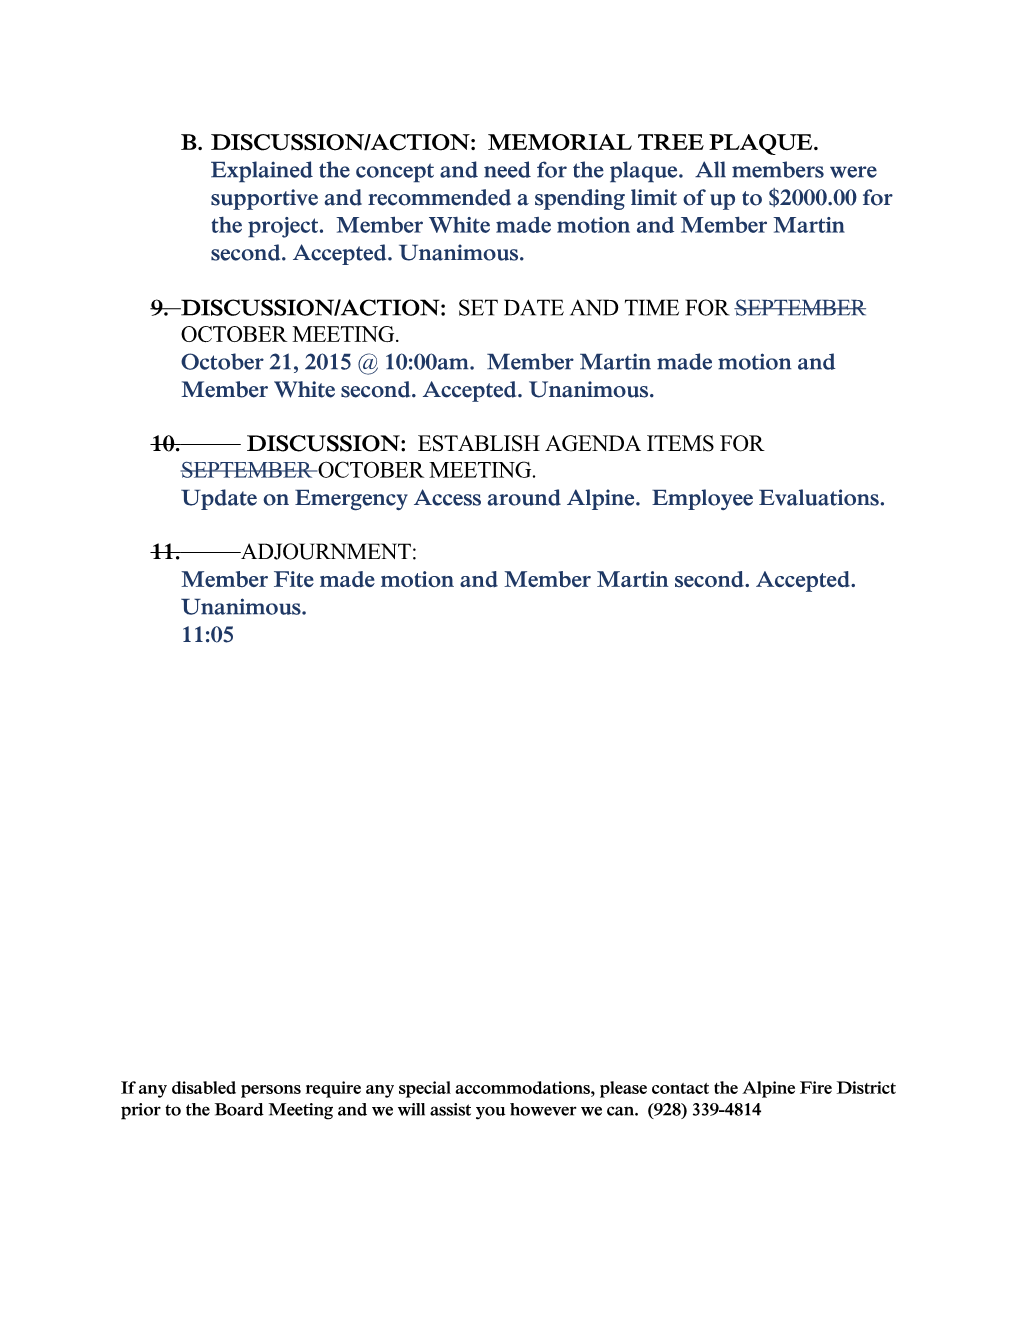 Agenda for Theseptember 16, 2015 Alpine Fire District Board Regular Monthly Meeting